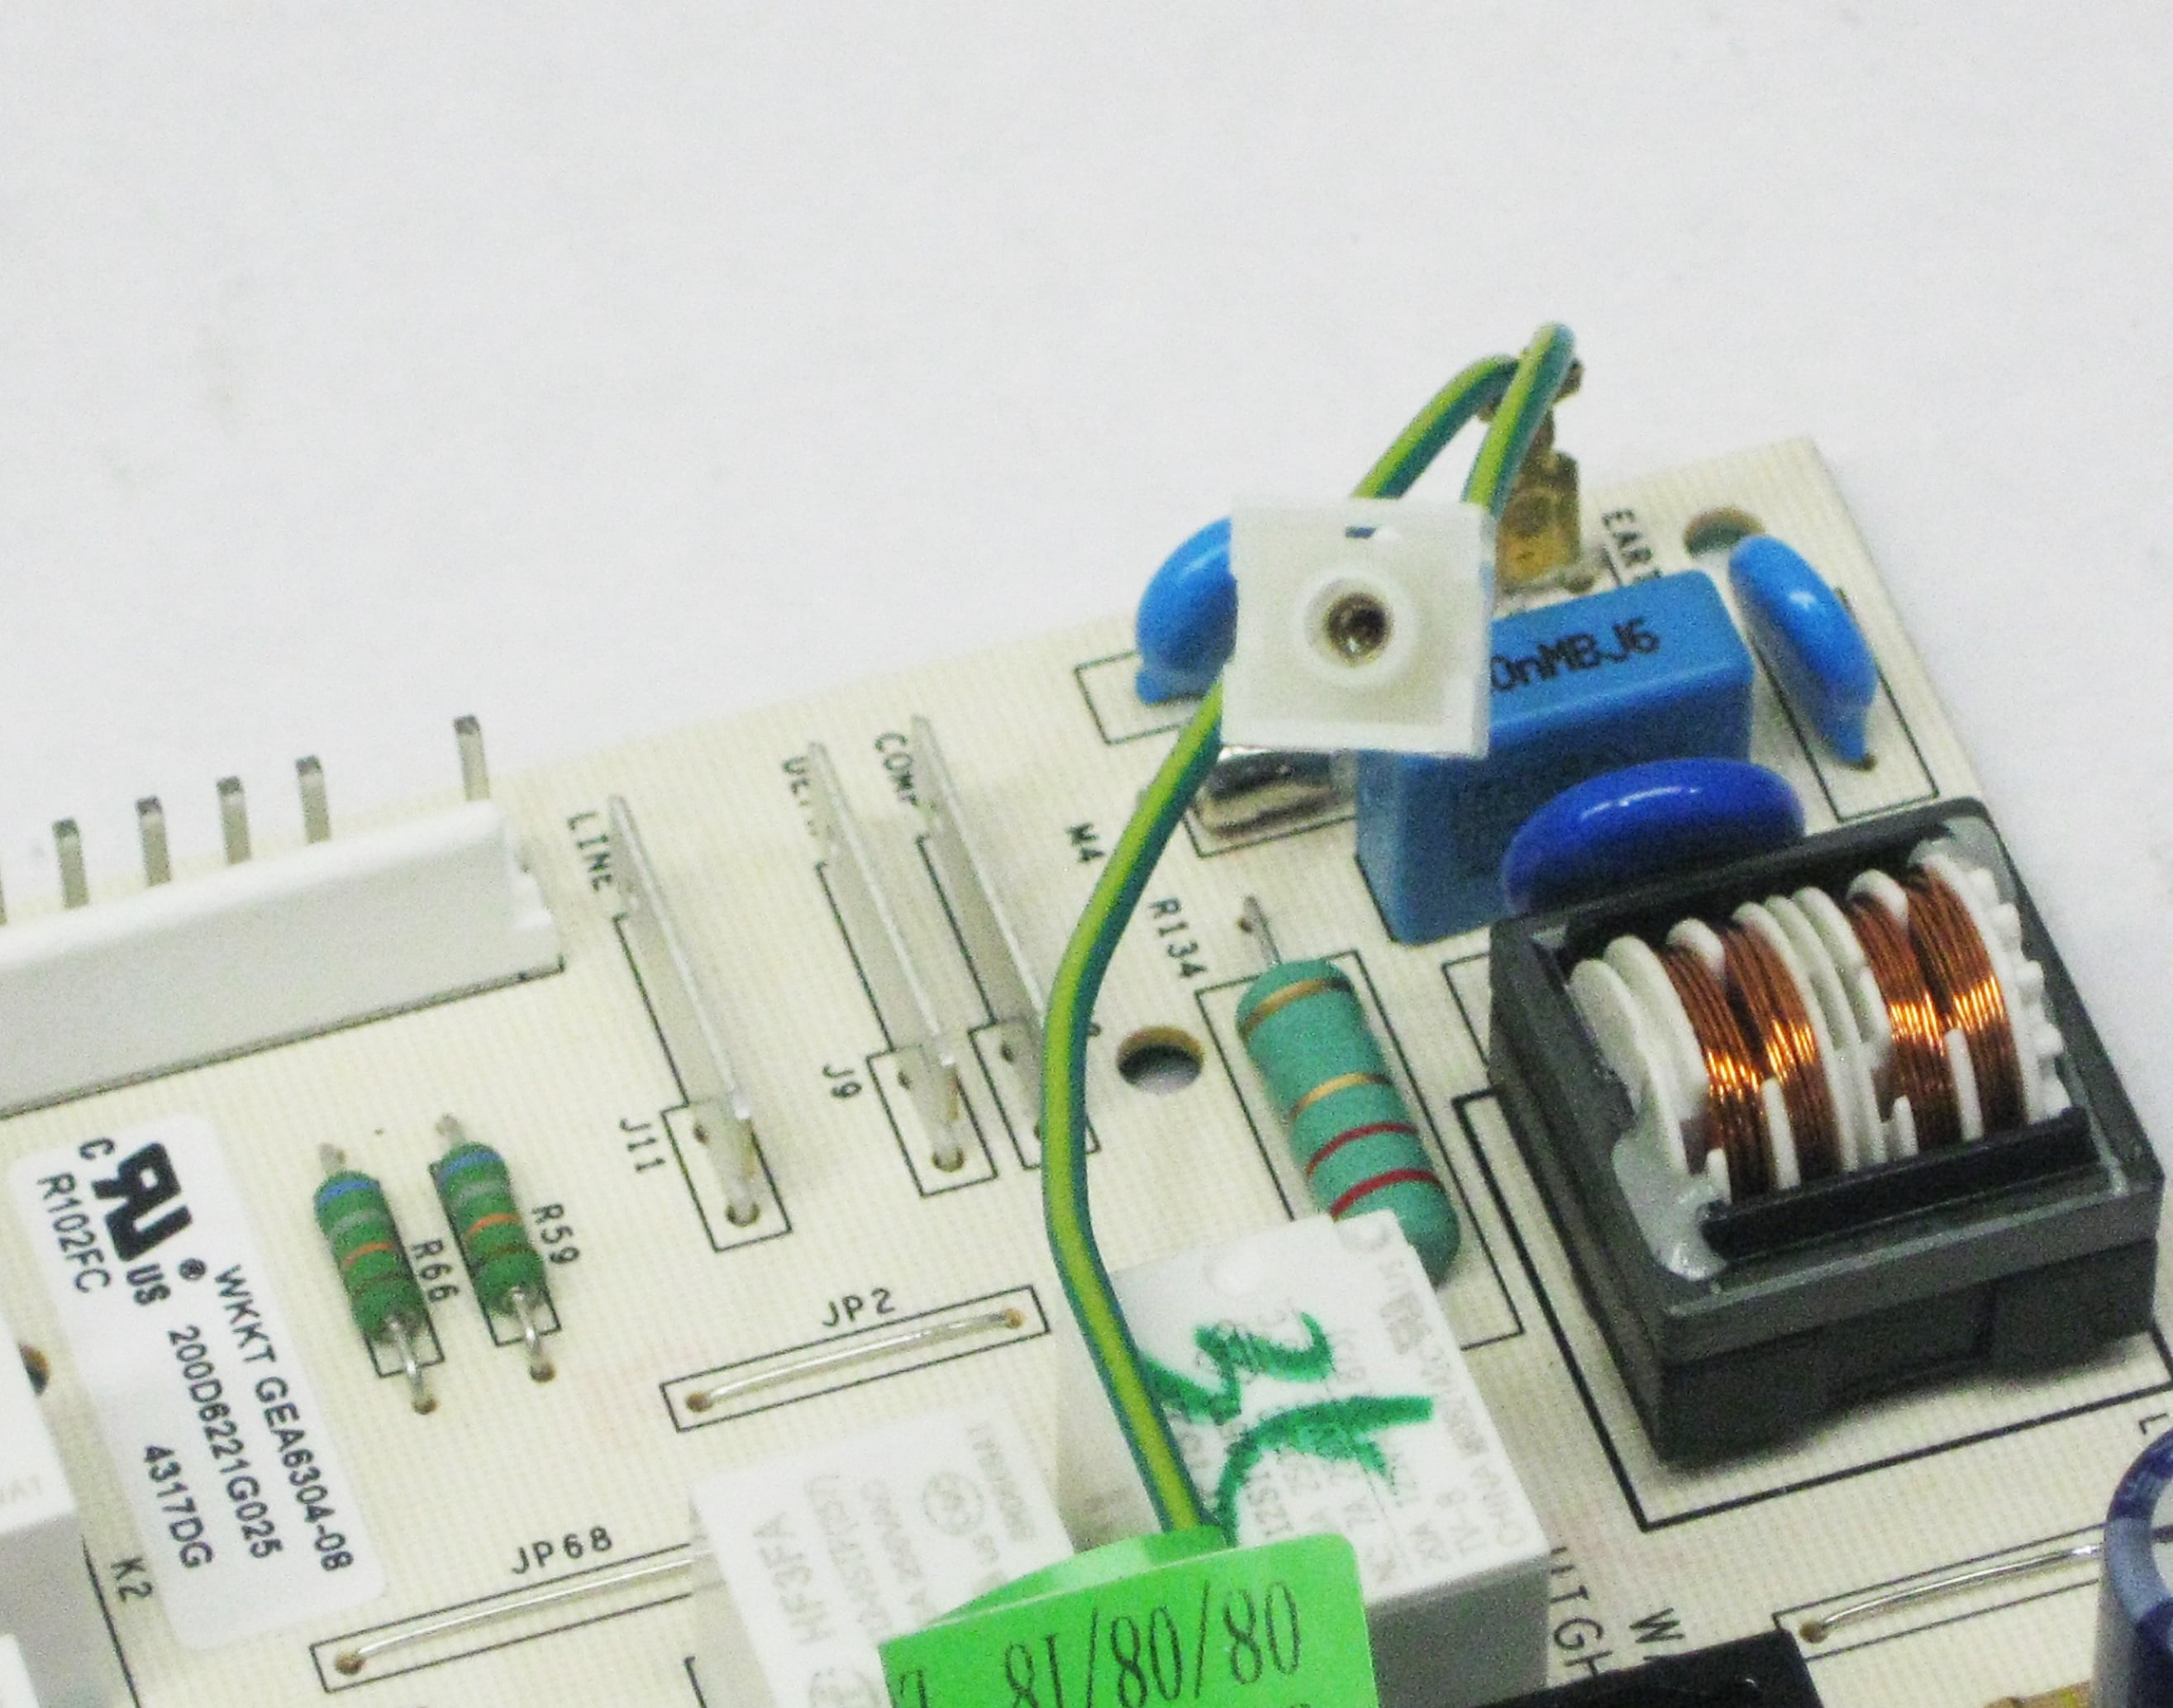 Details about  / New Replacement Control Board For GE Refrigerator WR55X11072 AP5270197 PS3496898